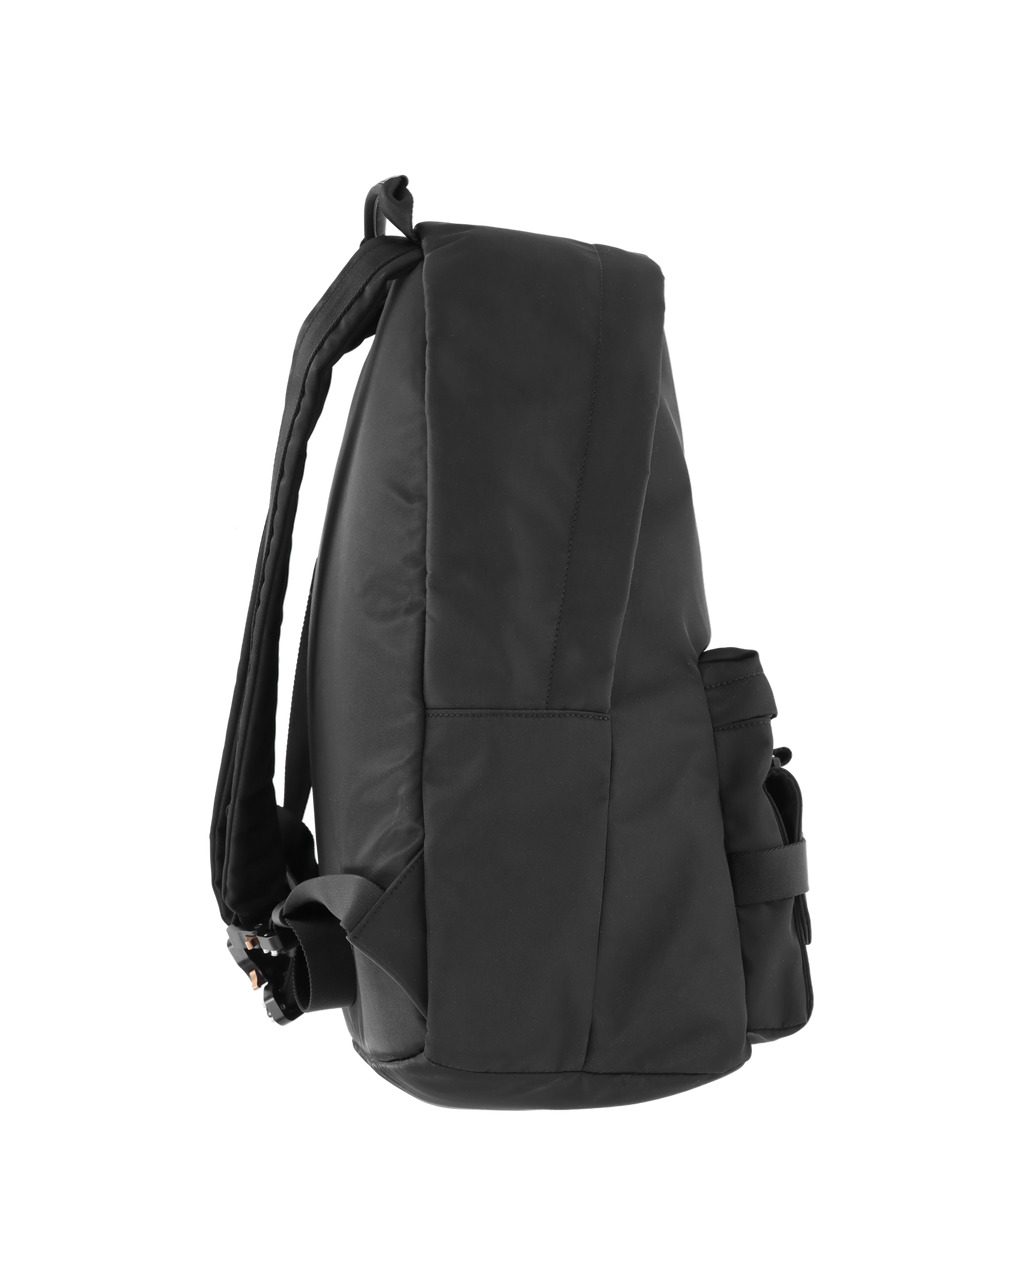 TRICON BACKPACK - 2